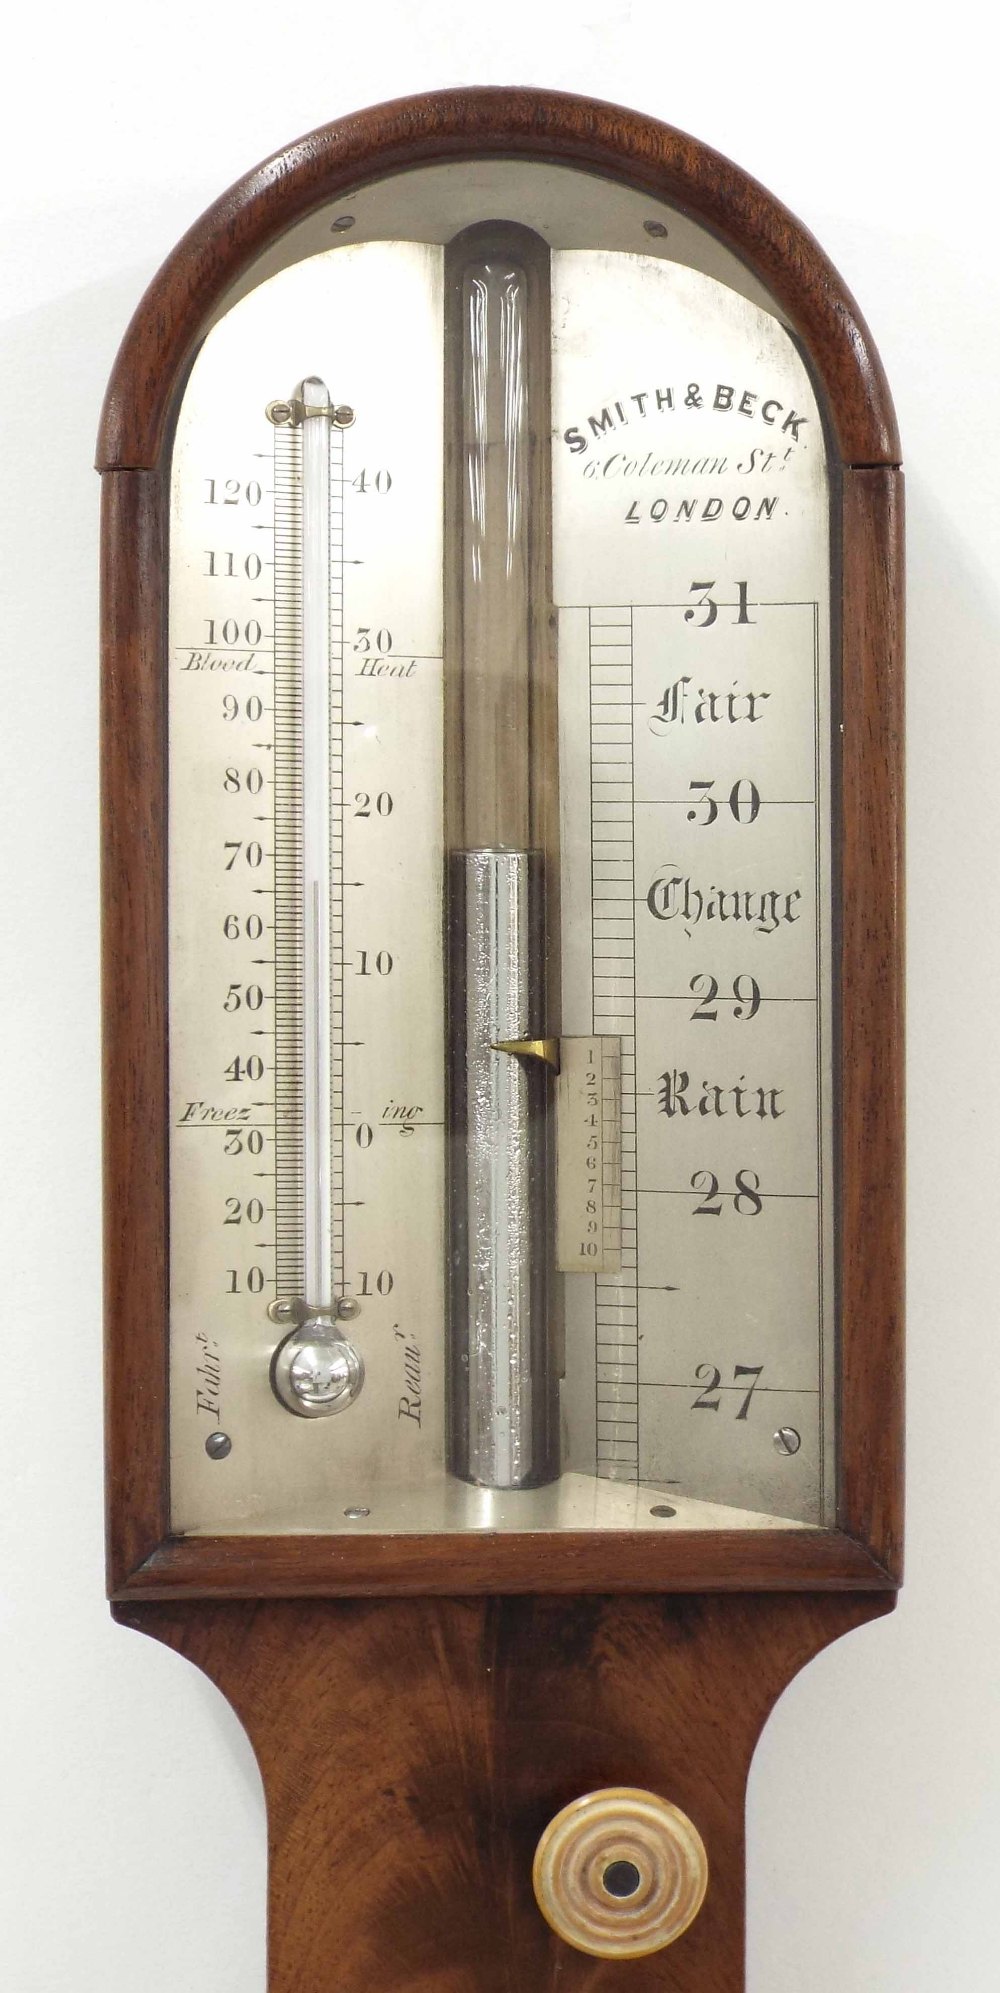 Mahogany stick barometer, the angled silvered scale signed Smith & Beck, 6 Coleman St, London, - Image 2 of 2